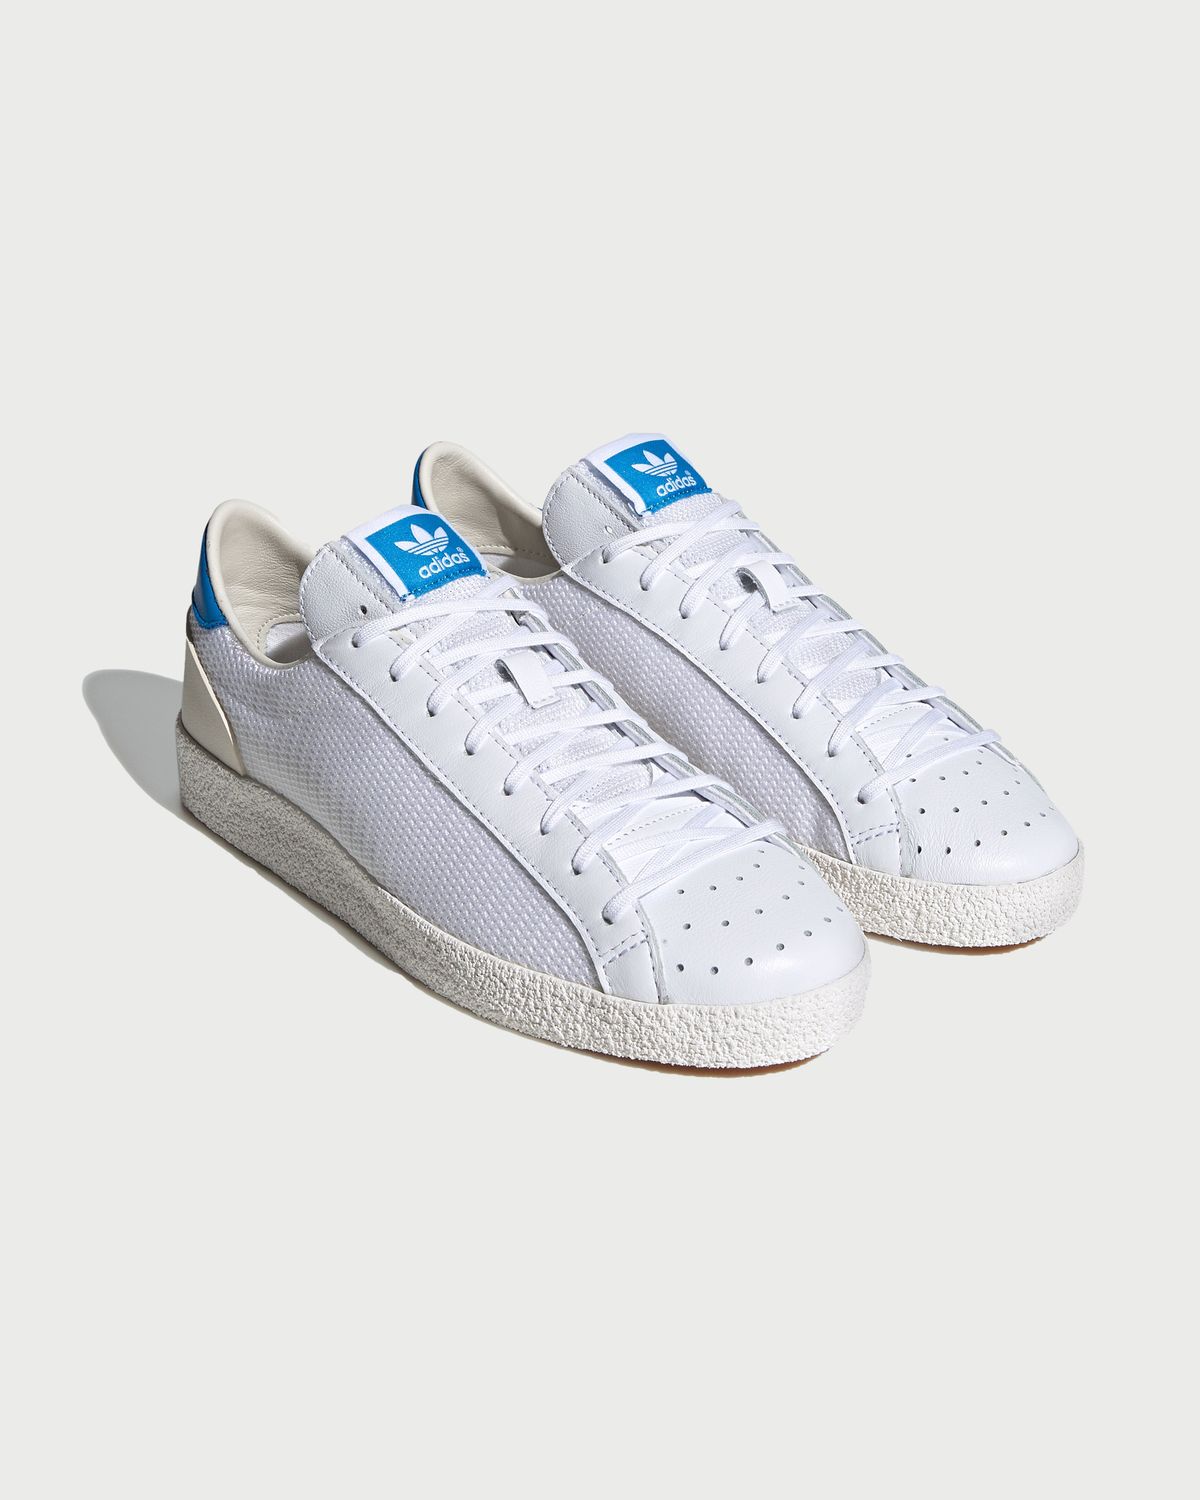 Adidas – Aderley Spezial Off White - Sneakers - White - Image 2